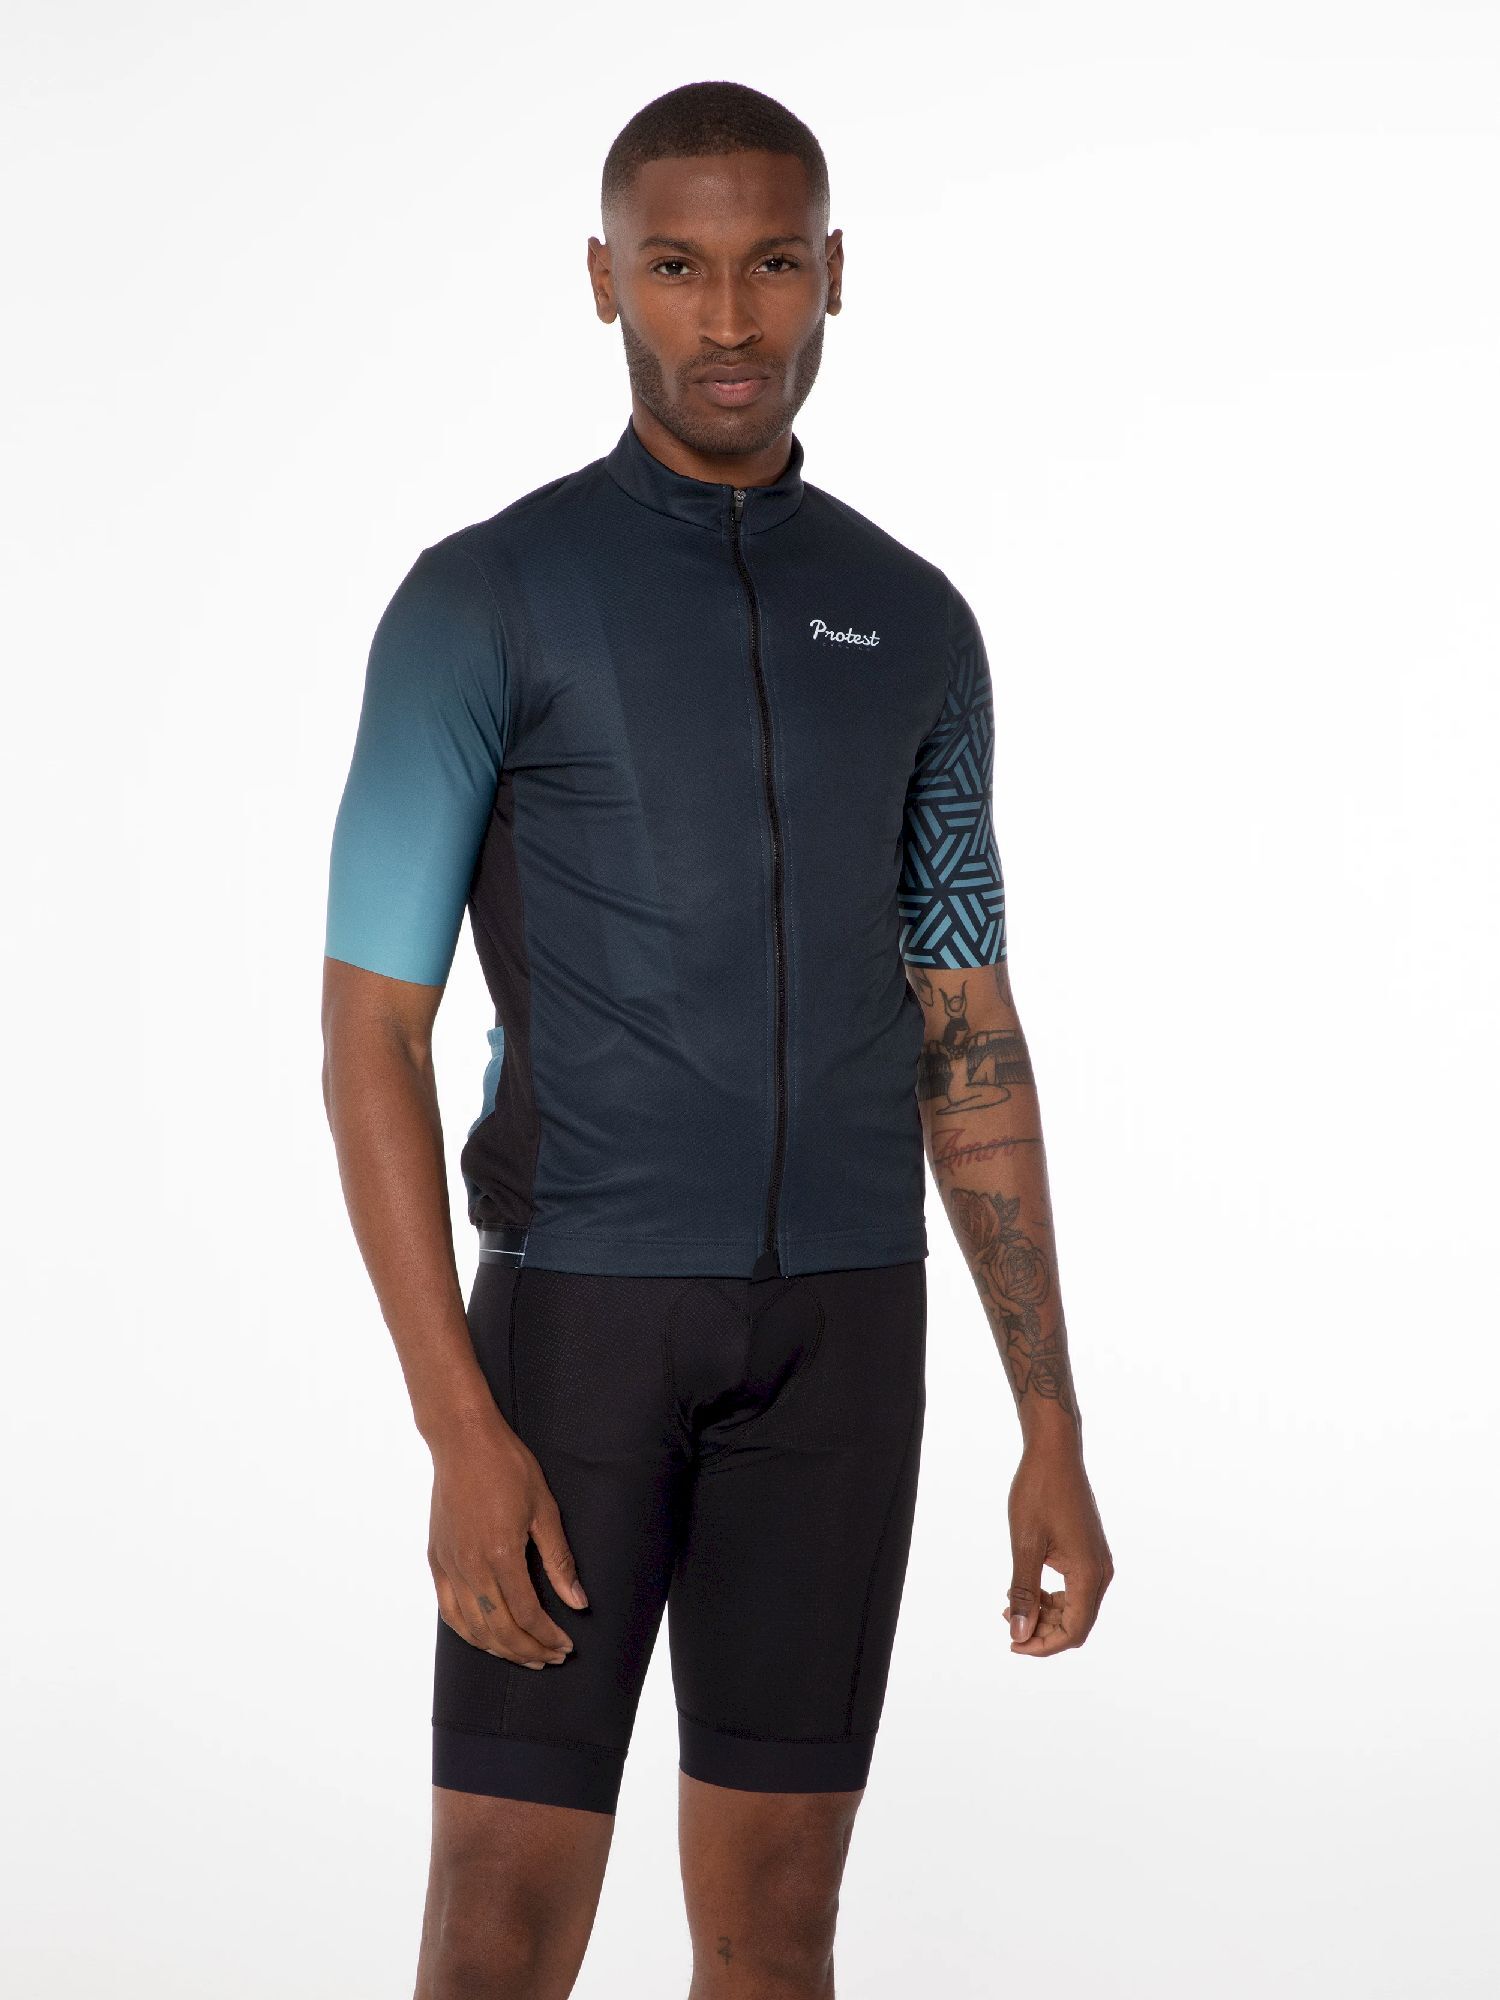 Protest Prteddy - Maillot ciclismo - Hombre | Hardloop